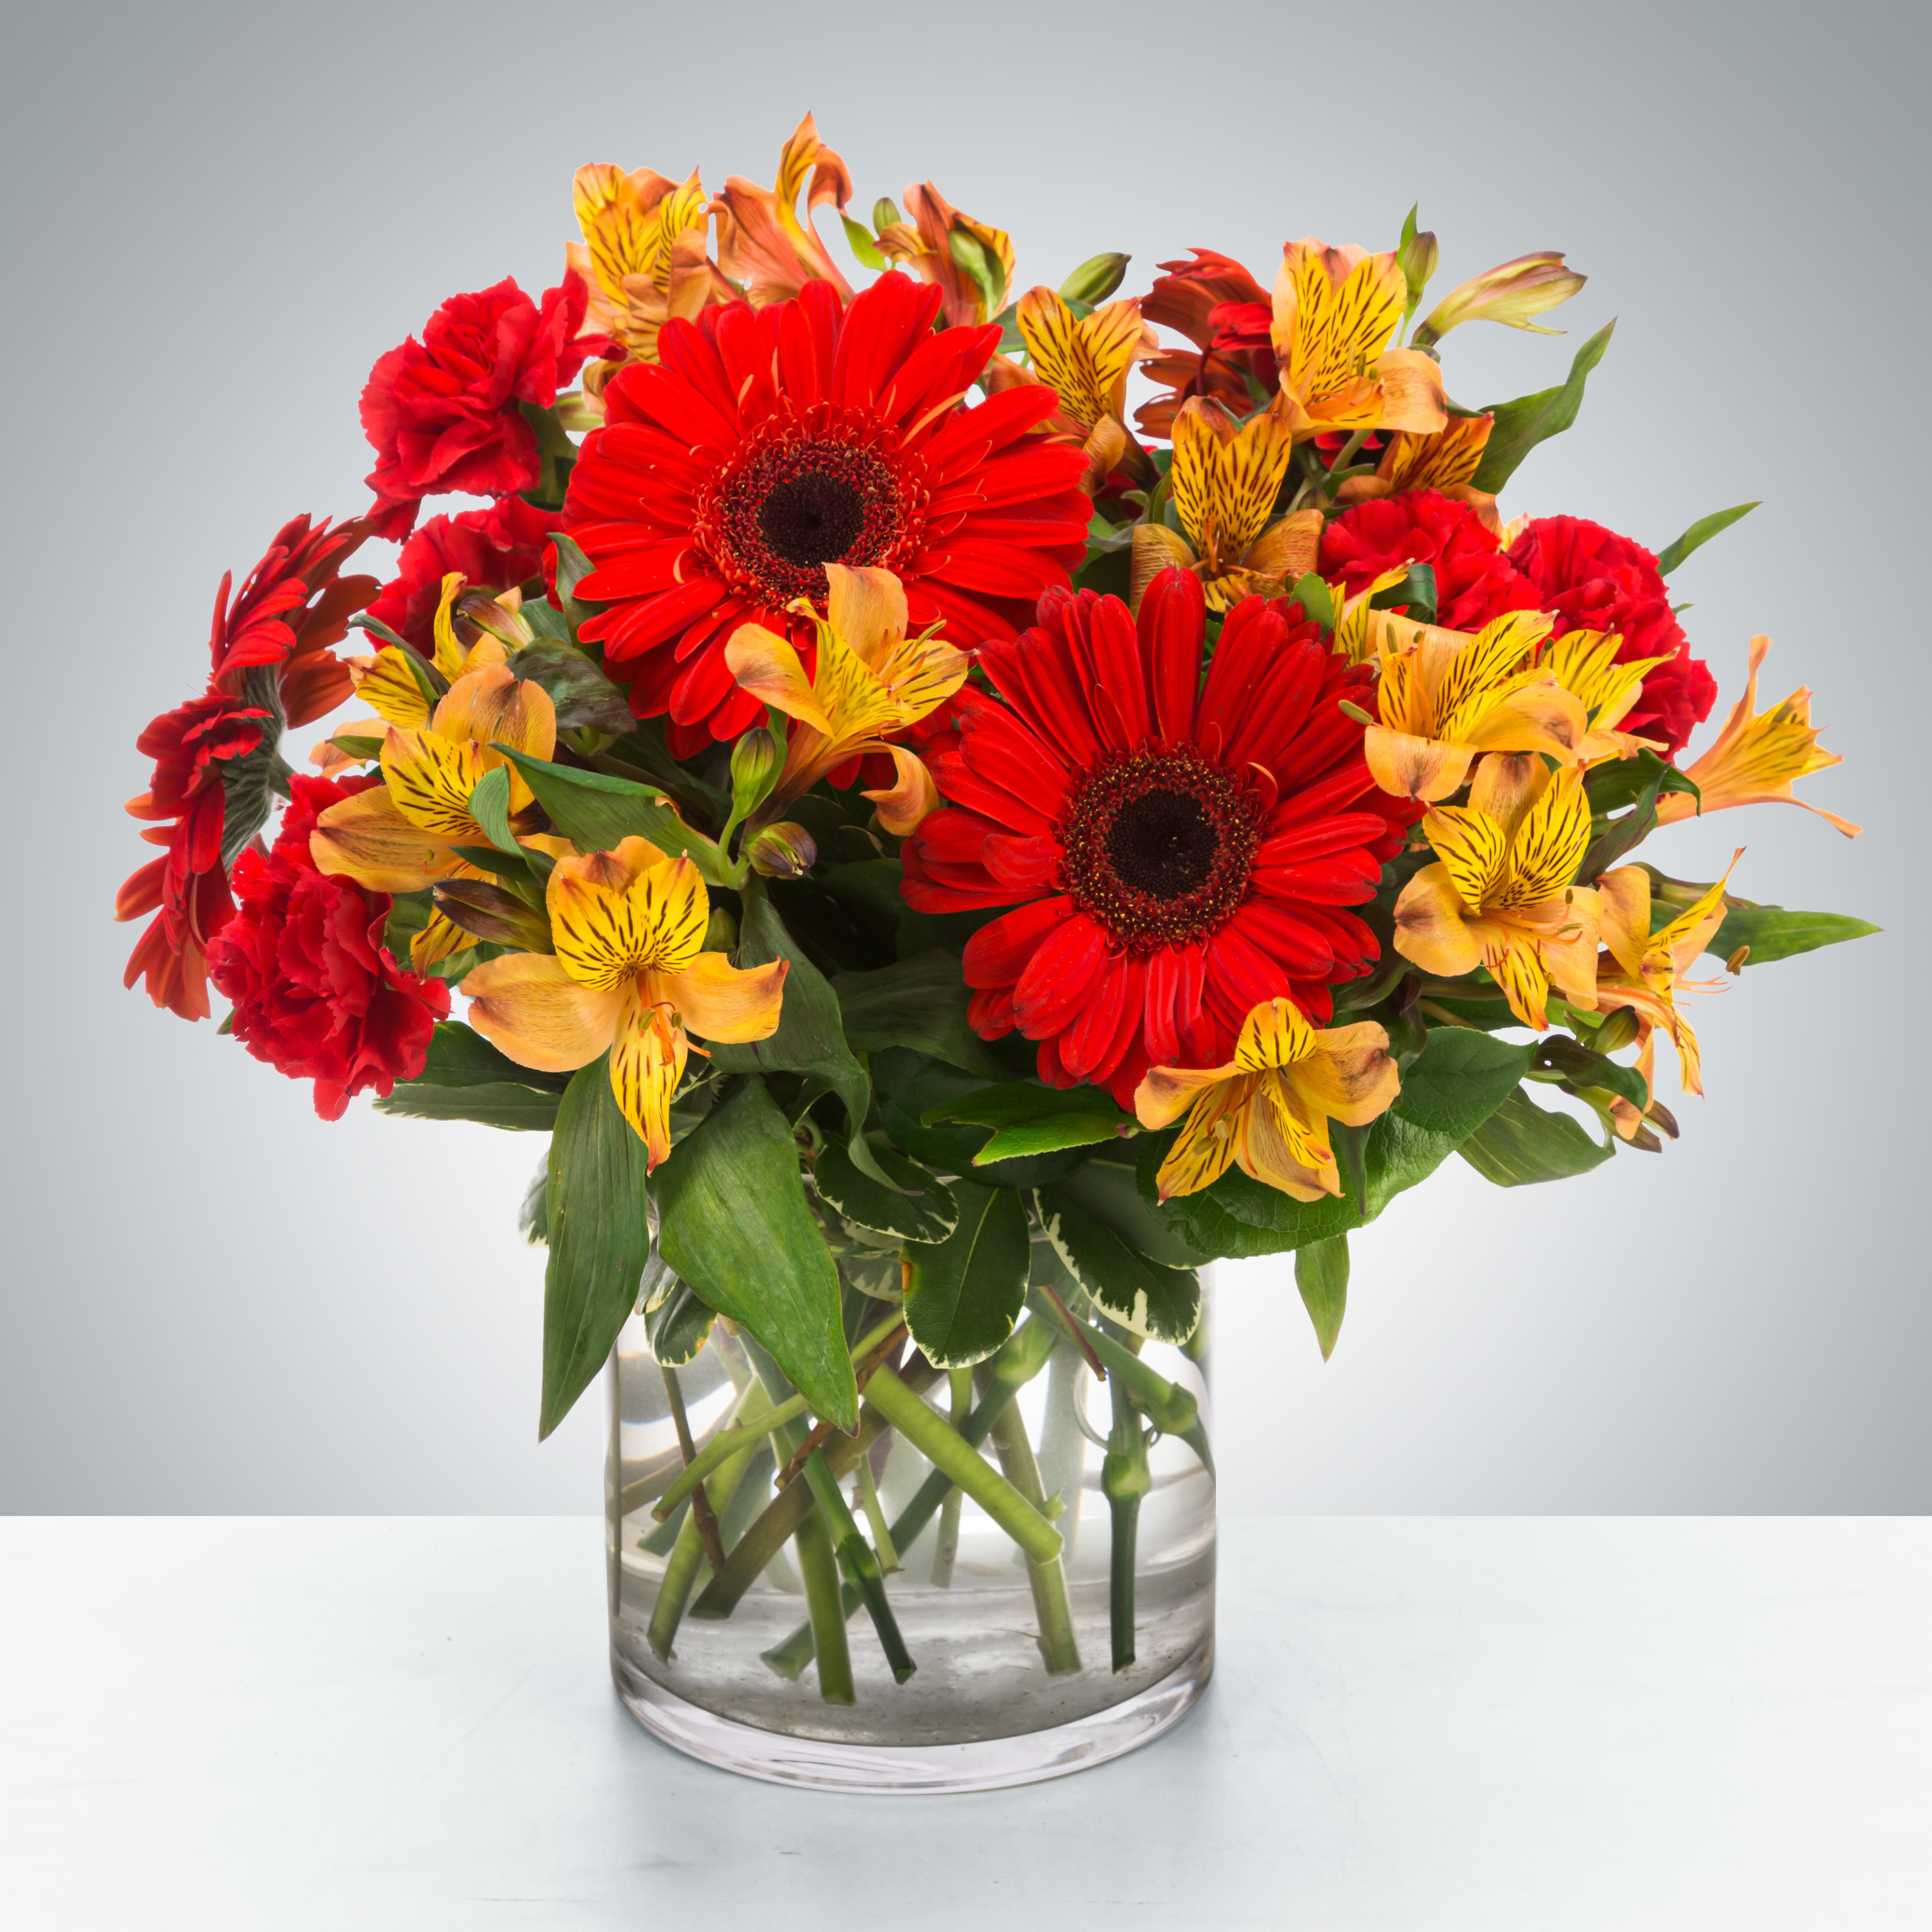 Cinnamon  - This cinnamon-colored arrangement is a perfect taste of fall.   